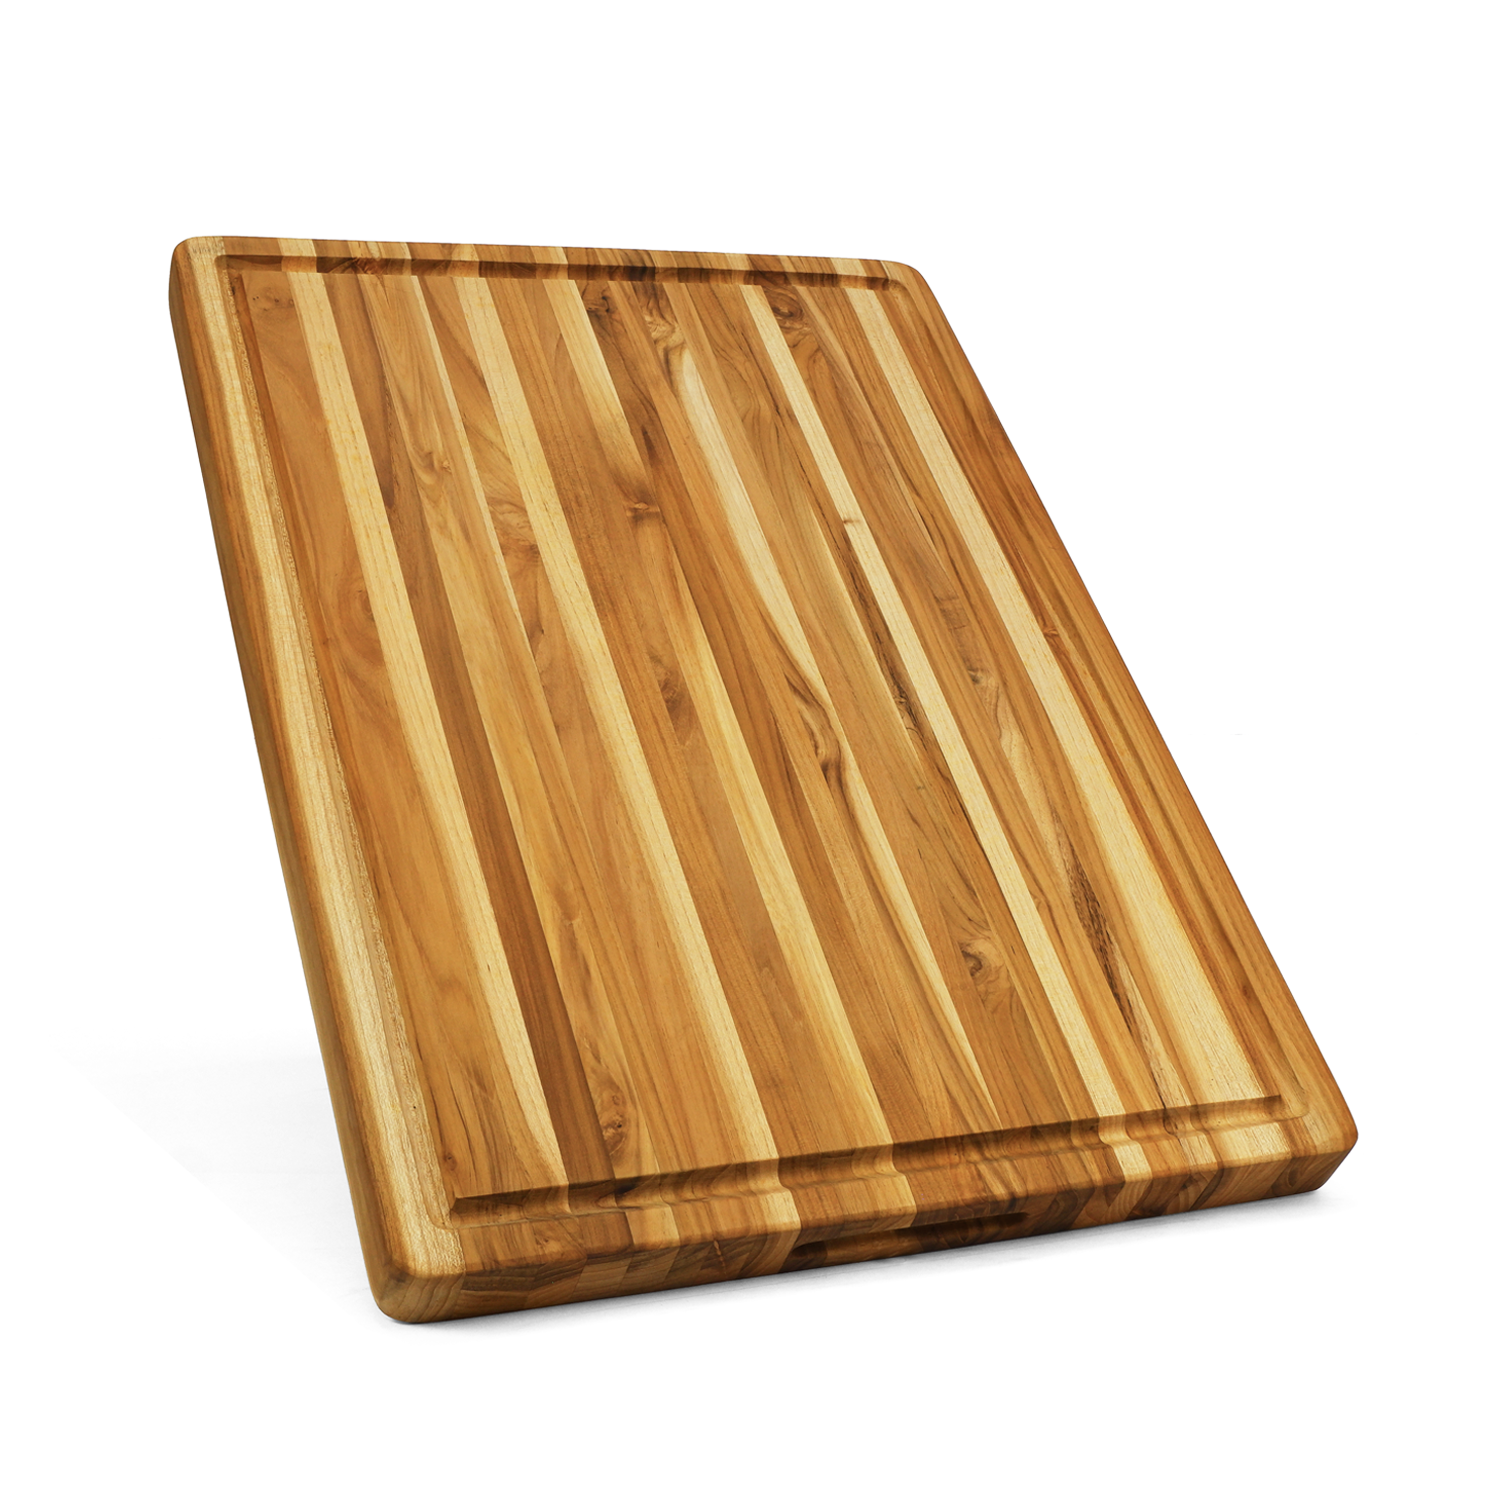 BEEFURNI Rectangle Shape Real Teak Wood Durable Hard Wooden Cutting Chopping Board With Juice Groove 24 INCH, Pack of 5 Pieces-CASAINC